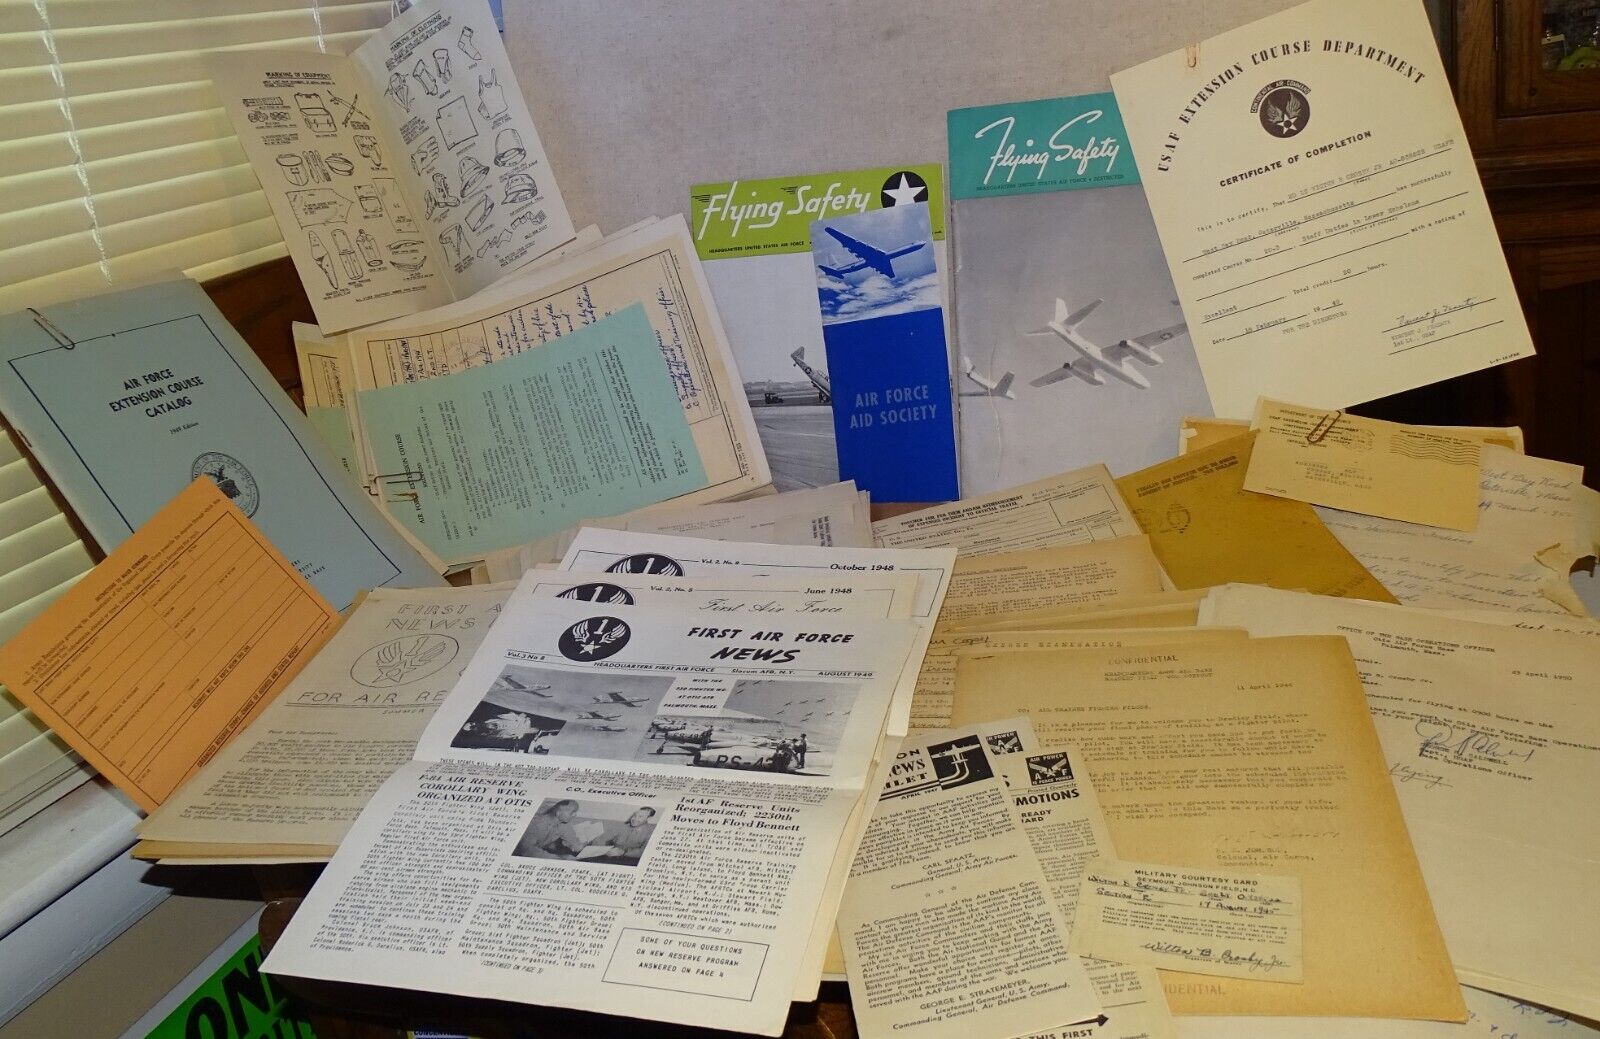 Pile of Papers & What-Not from someone in the Air Force late 1940s/early 1950s